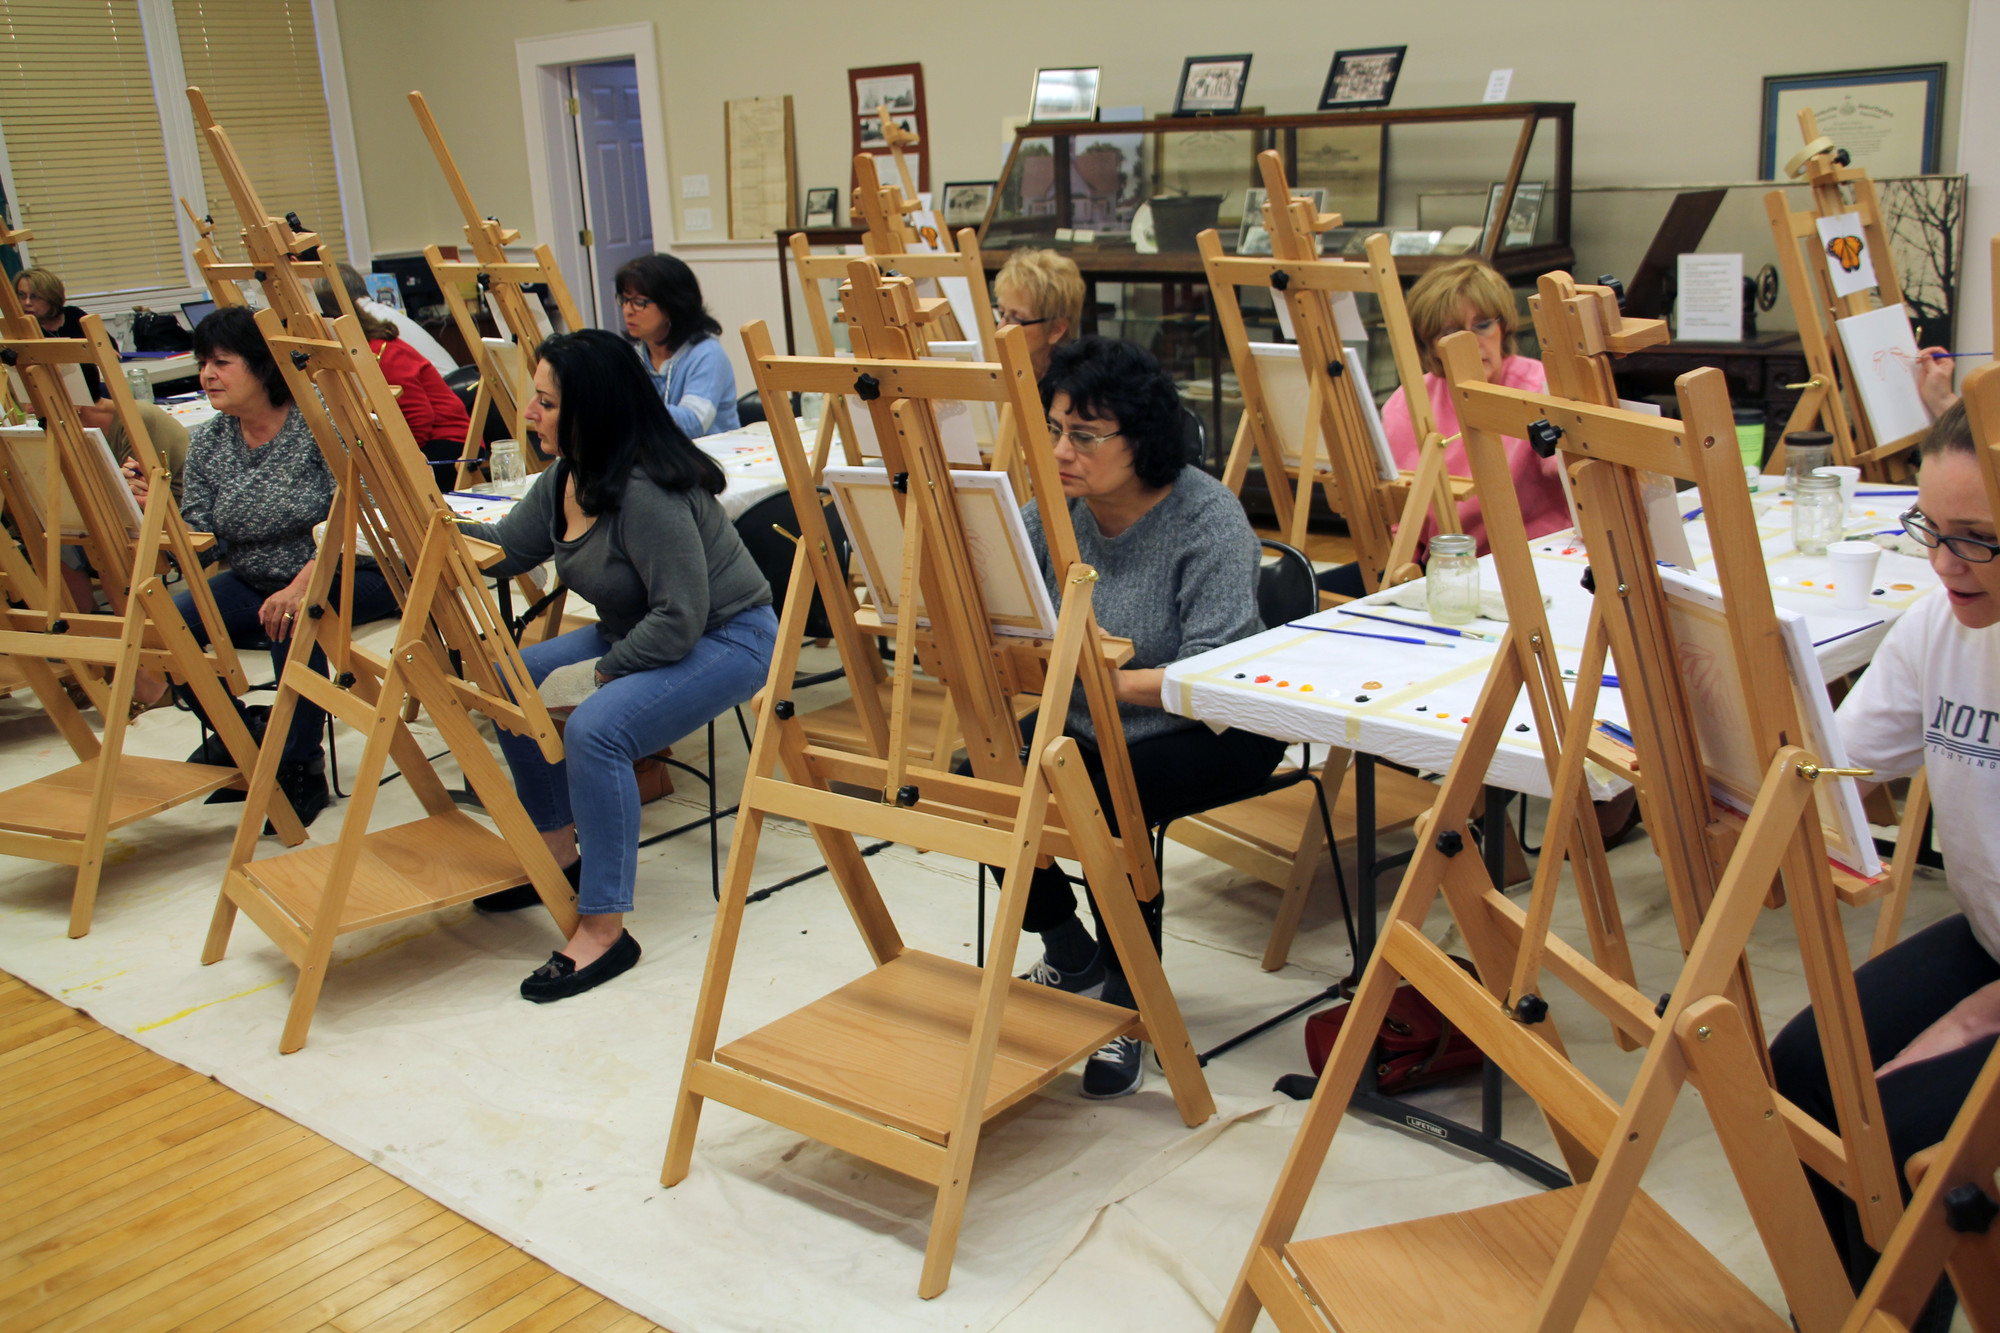 Historical artifacts provided the backdrop for Paint Night at the Museum, hosted by the Seaford Historical Society last Friday night. The class was led by Seaford’s own master artist, Cliff Miller.